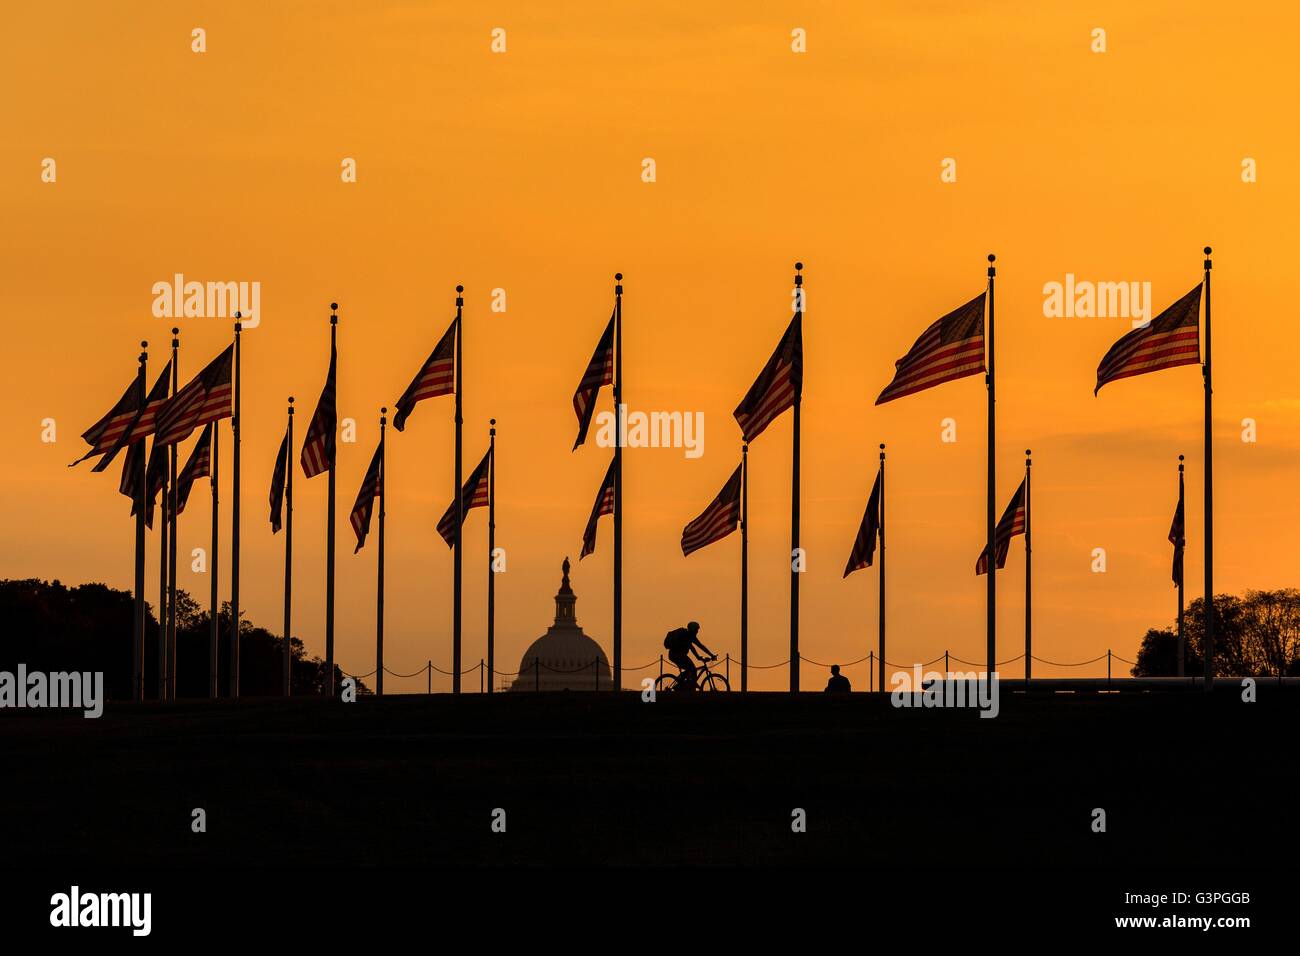 Flags fluttering around the Washington Monument silhouetted by sunset in Washington, DC. Stock Photo